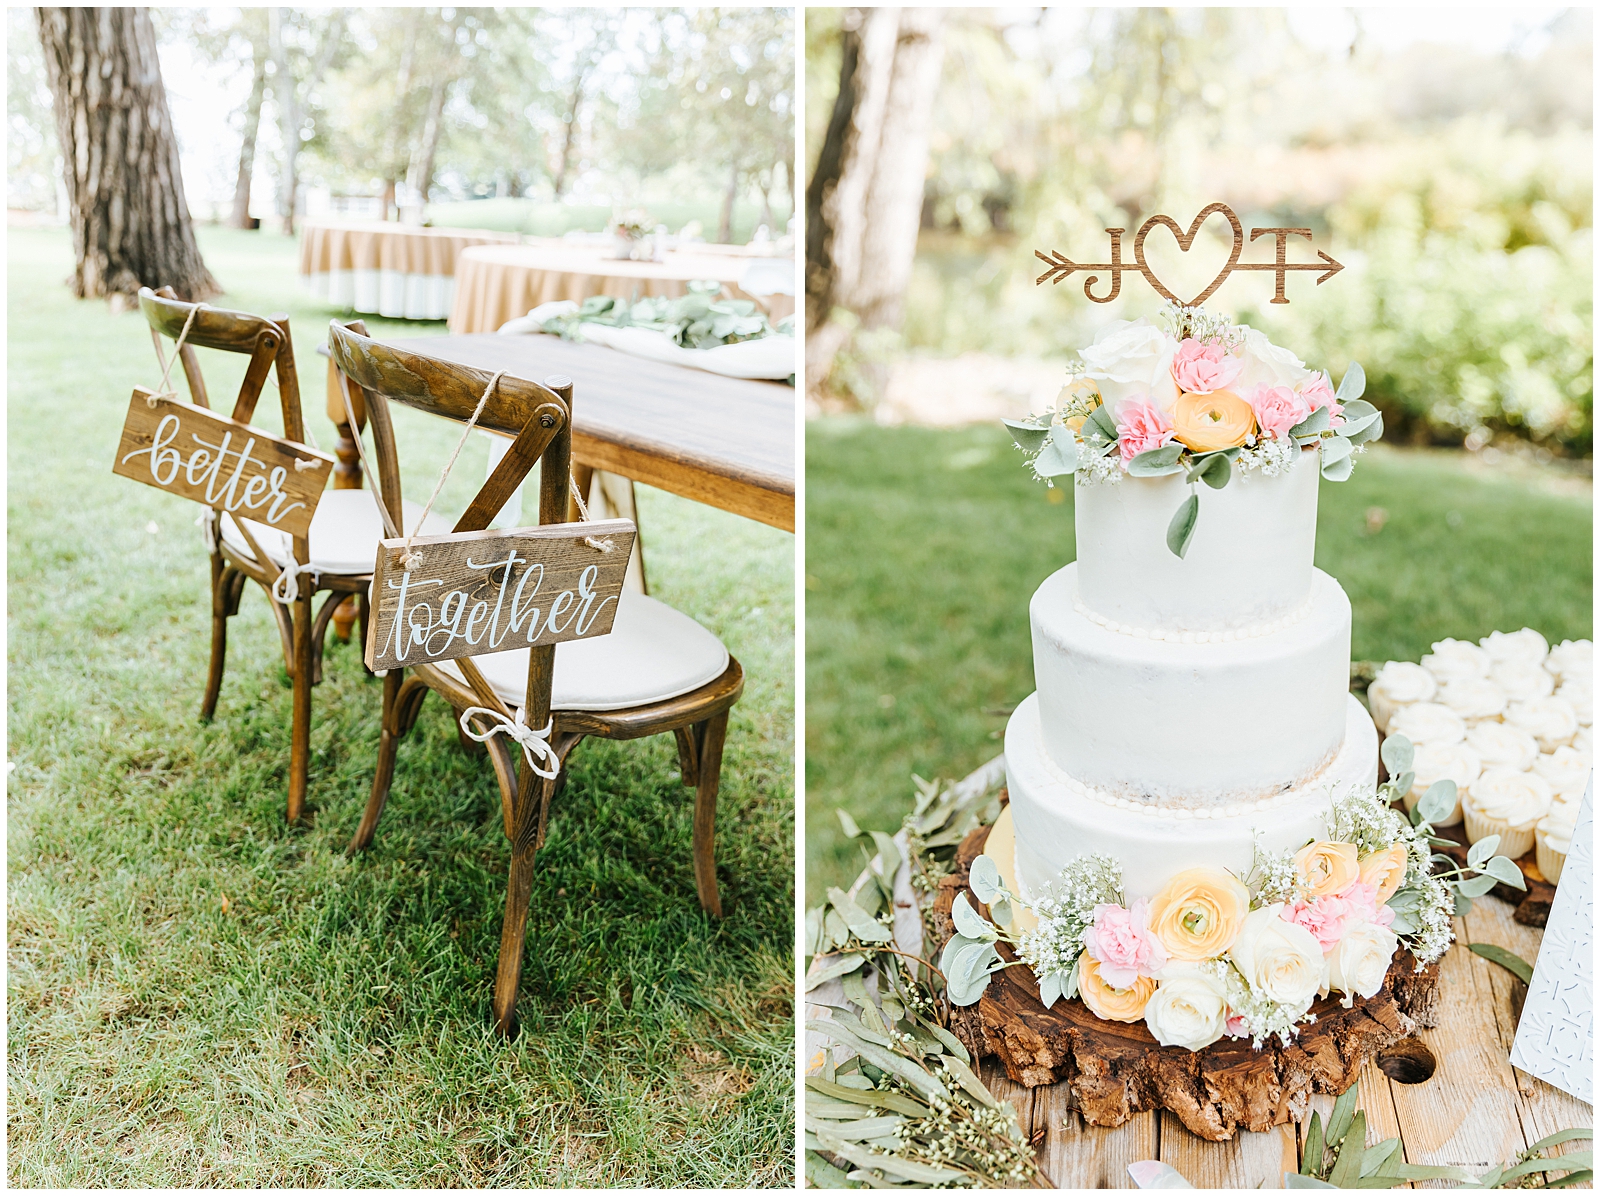 Rustic Chic White Willow Estate Wedding Details